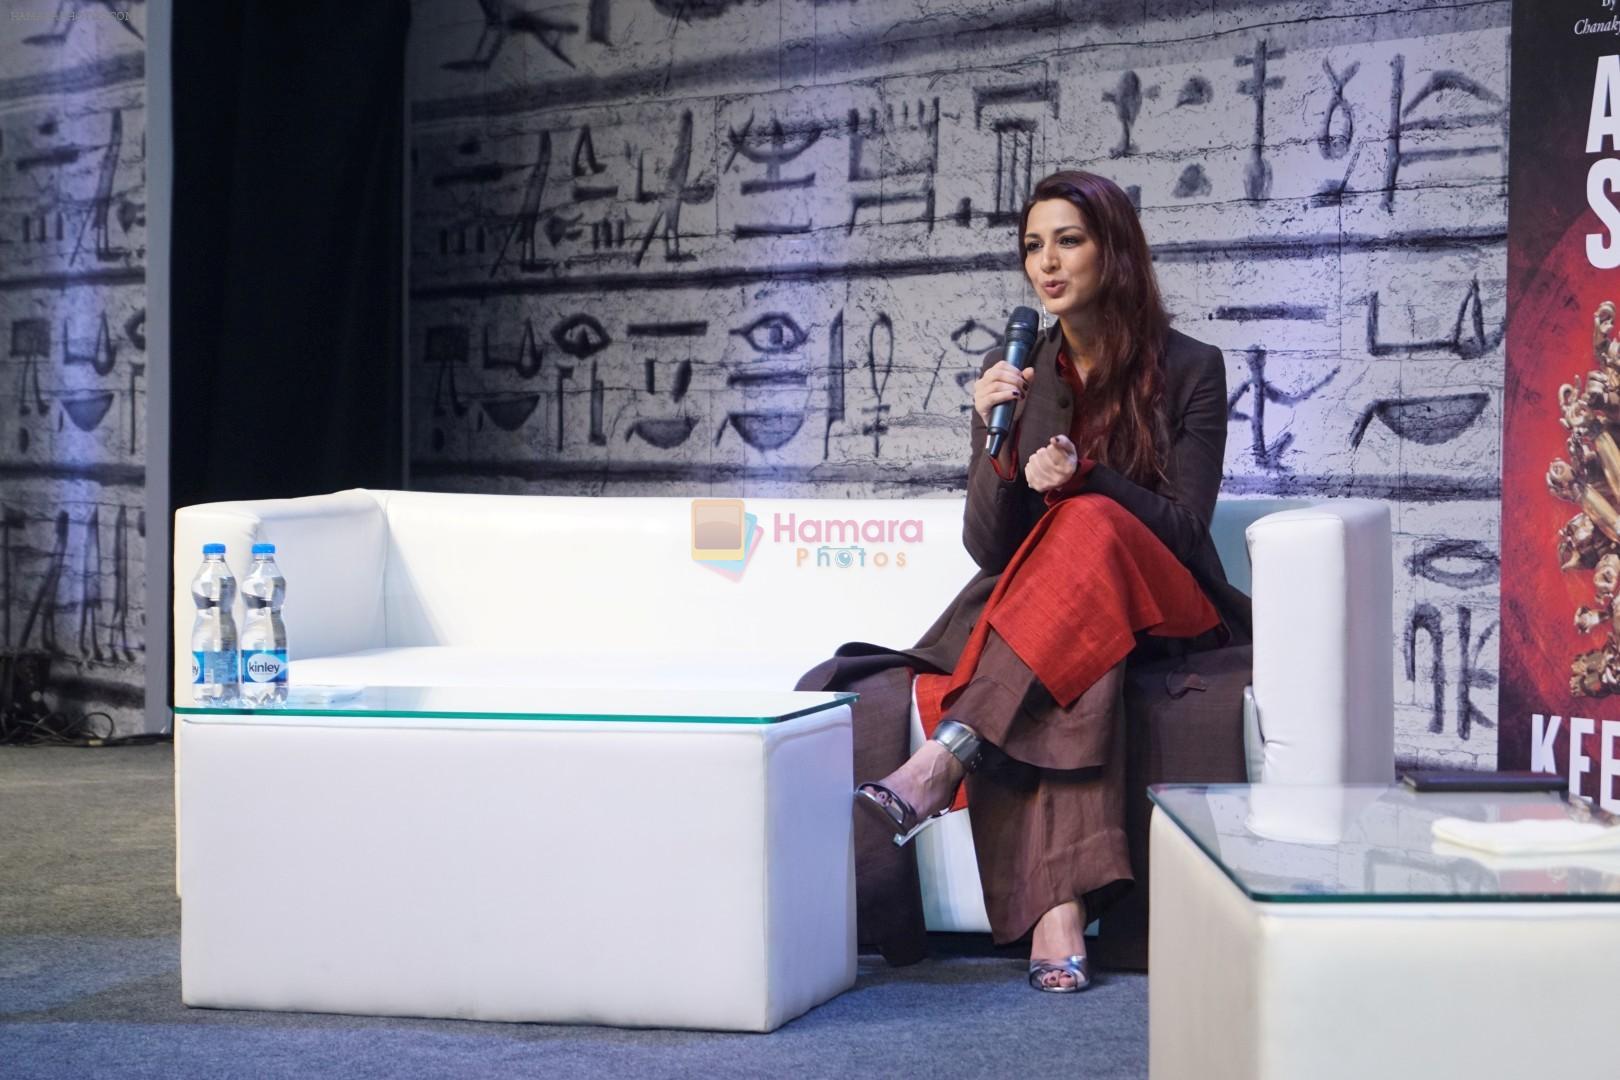 Sonali Bendre at the Book Launch Of Bharat Series- Keepers Of The Kalachakra by Ashwin Sanghi in Times Litfest on 16th Dec 2017